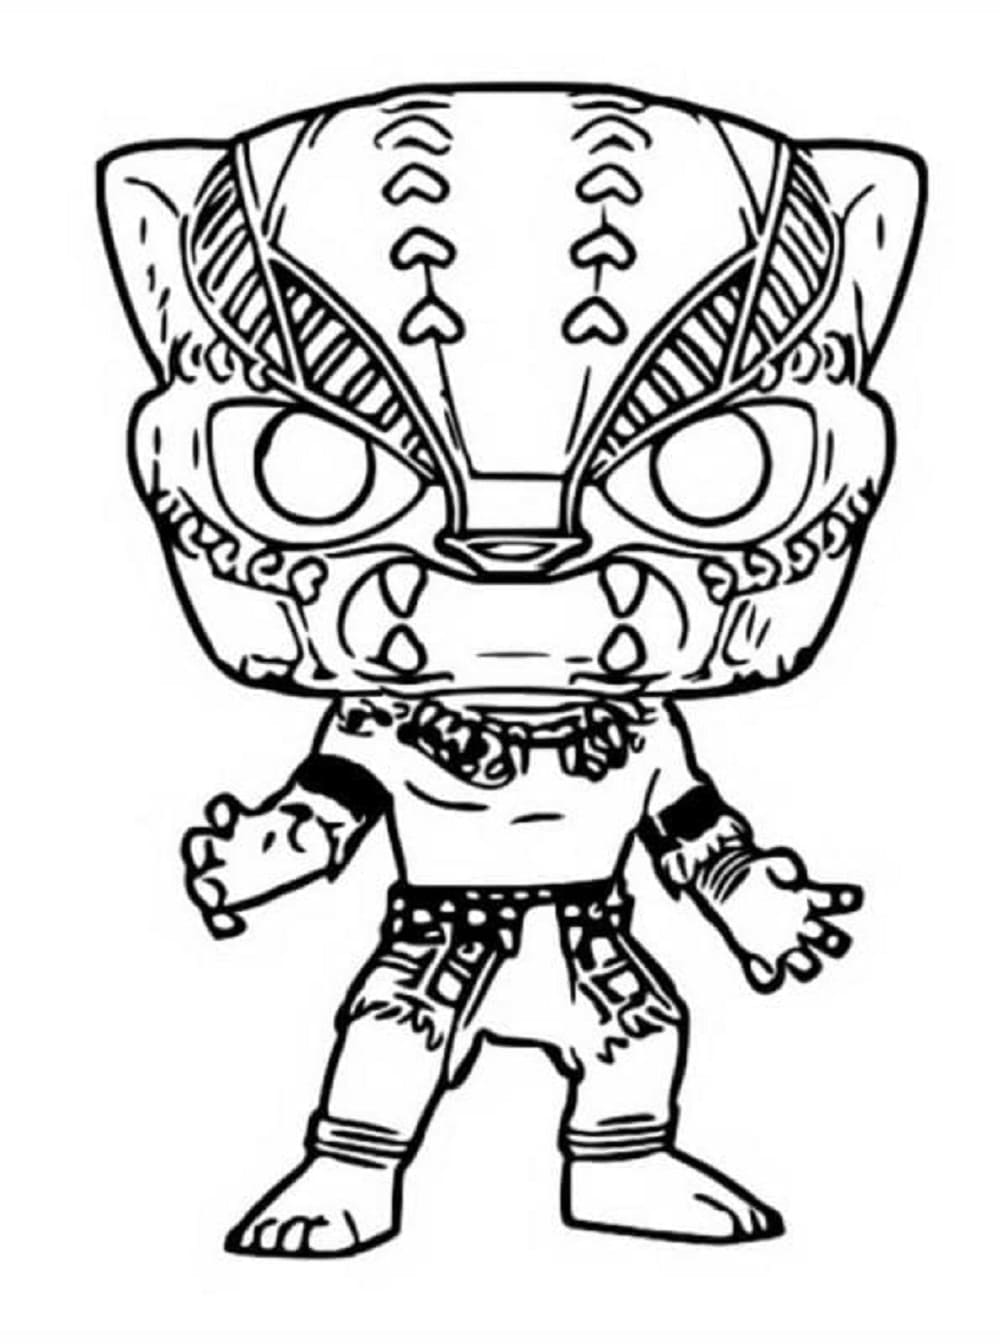 Printable Funko Pop Black Panther Coloring Page